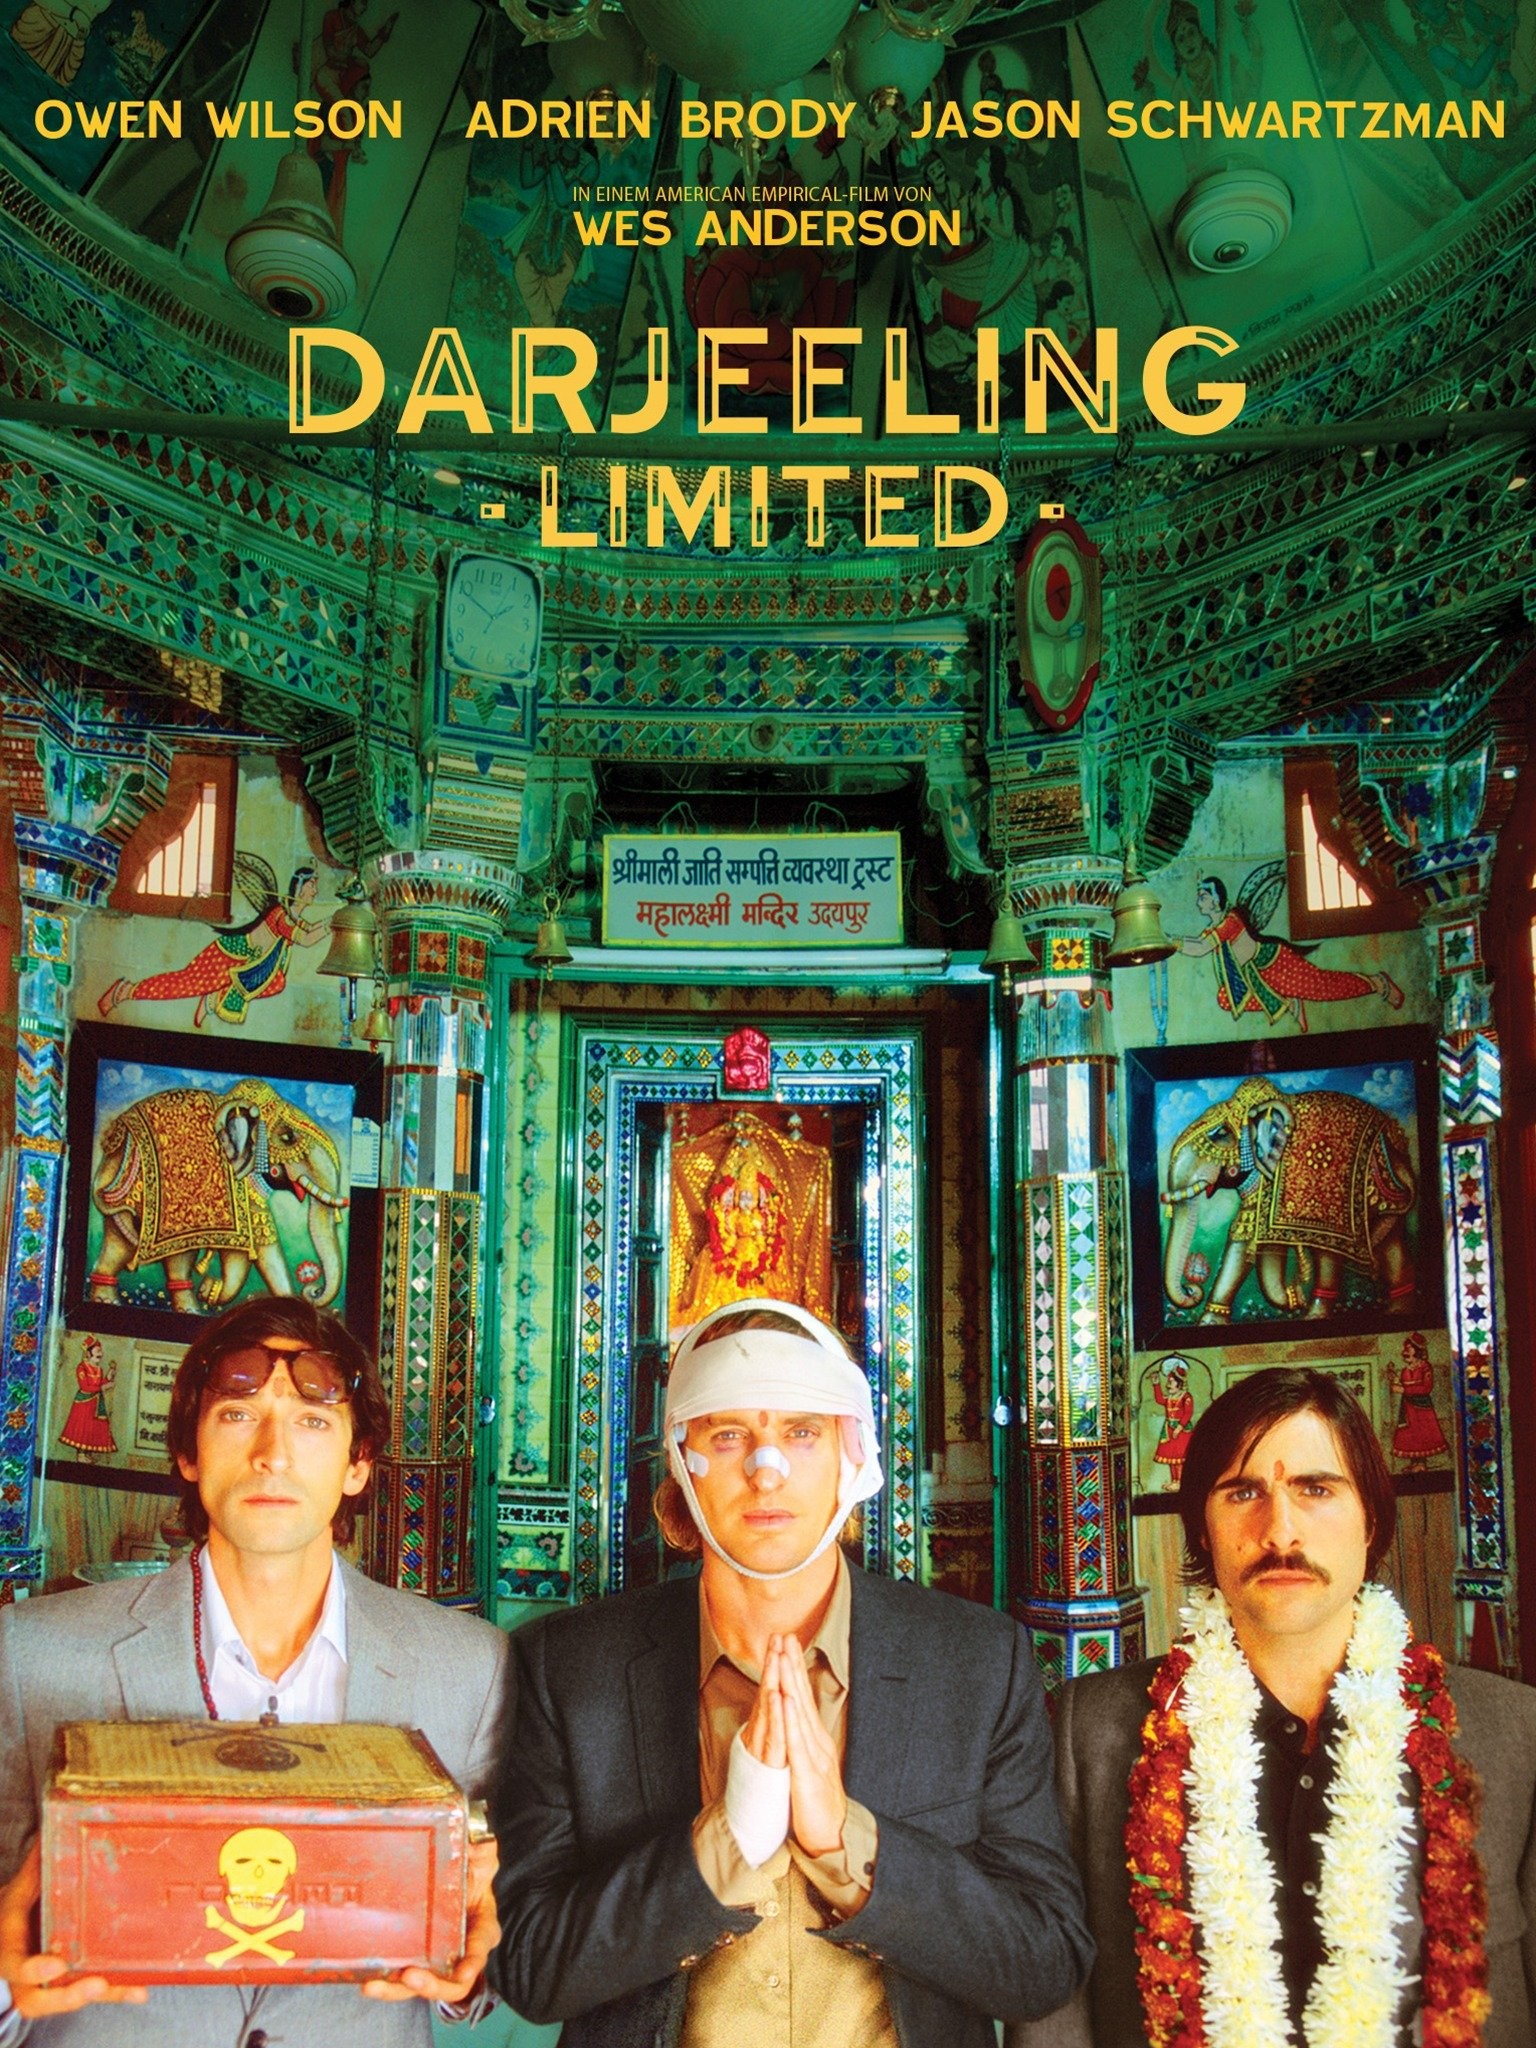 The Darjeeling Limited lacks the heart and wit of the best Wes Anderson  films